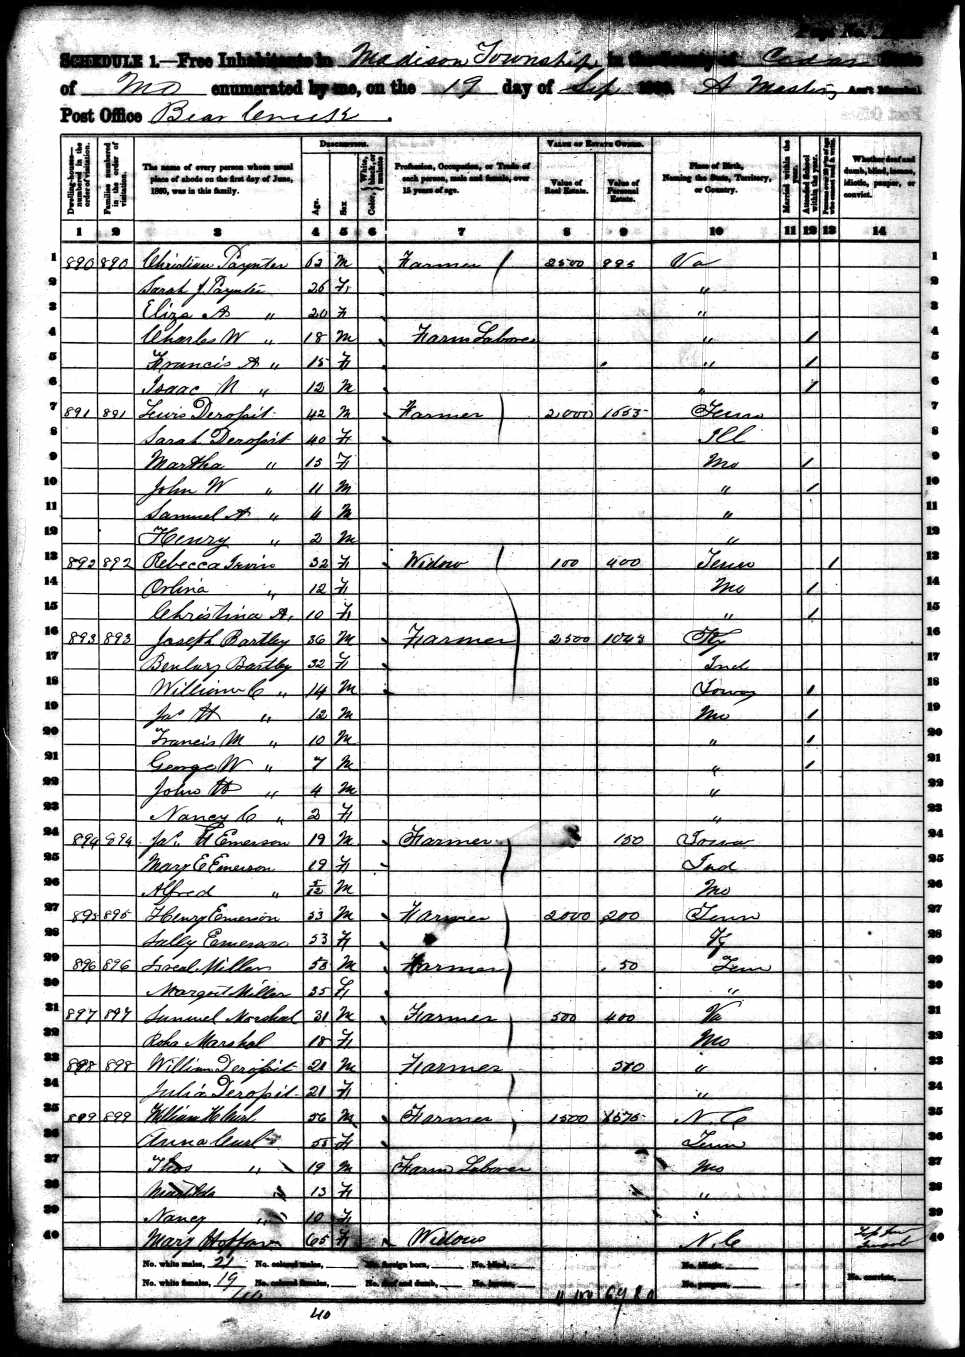 Christian Paynter, 1860 Cedar County, Missouri, census; with daughters Sarah J. and Eliza A.